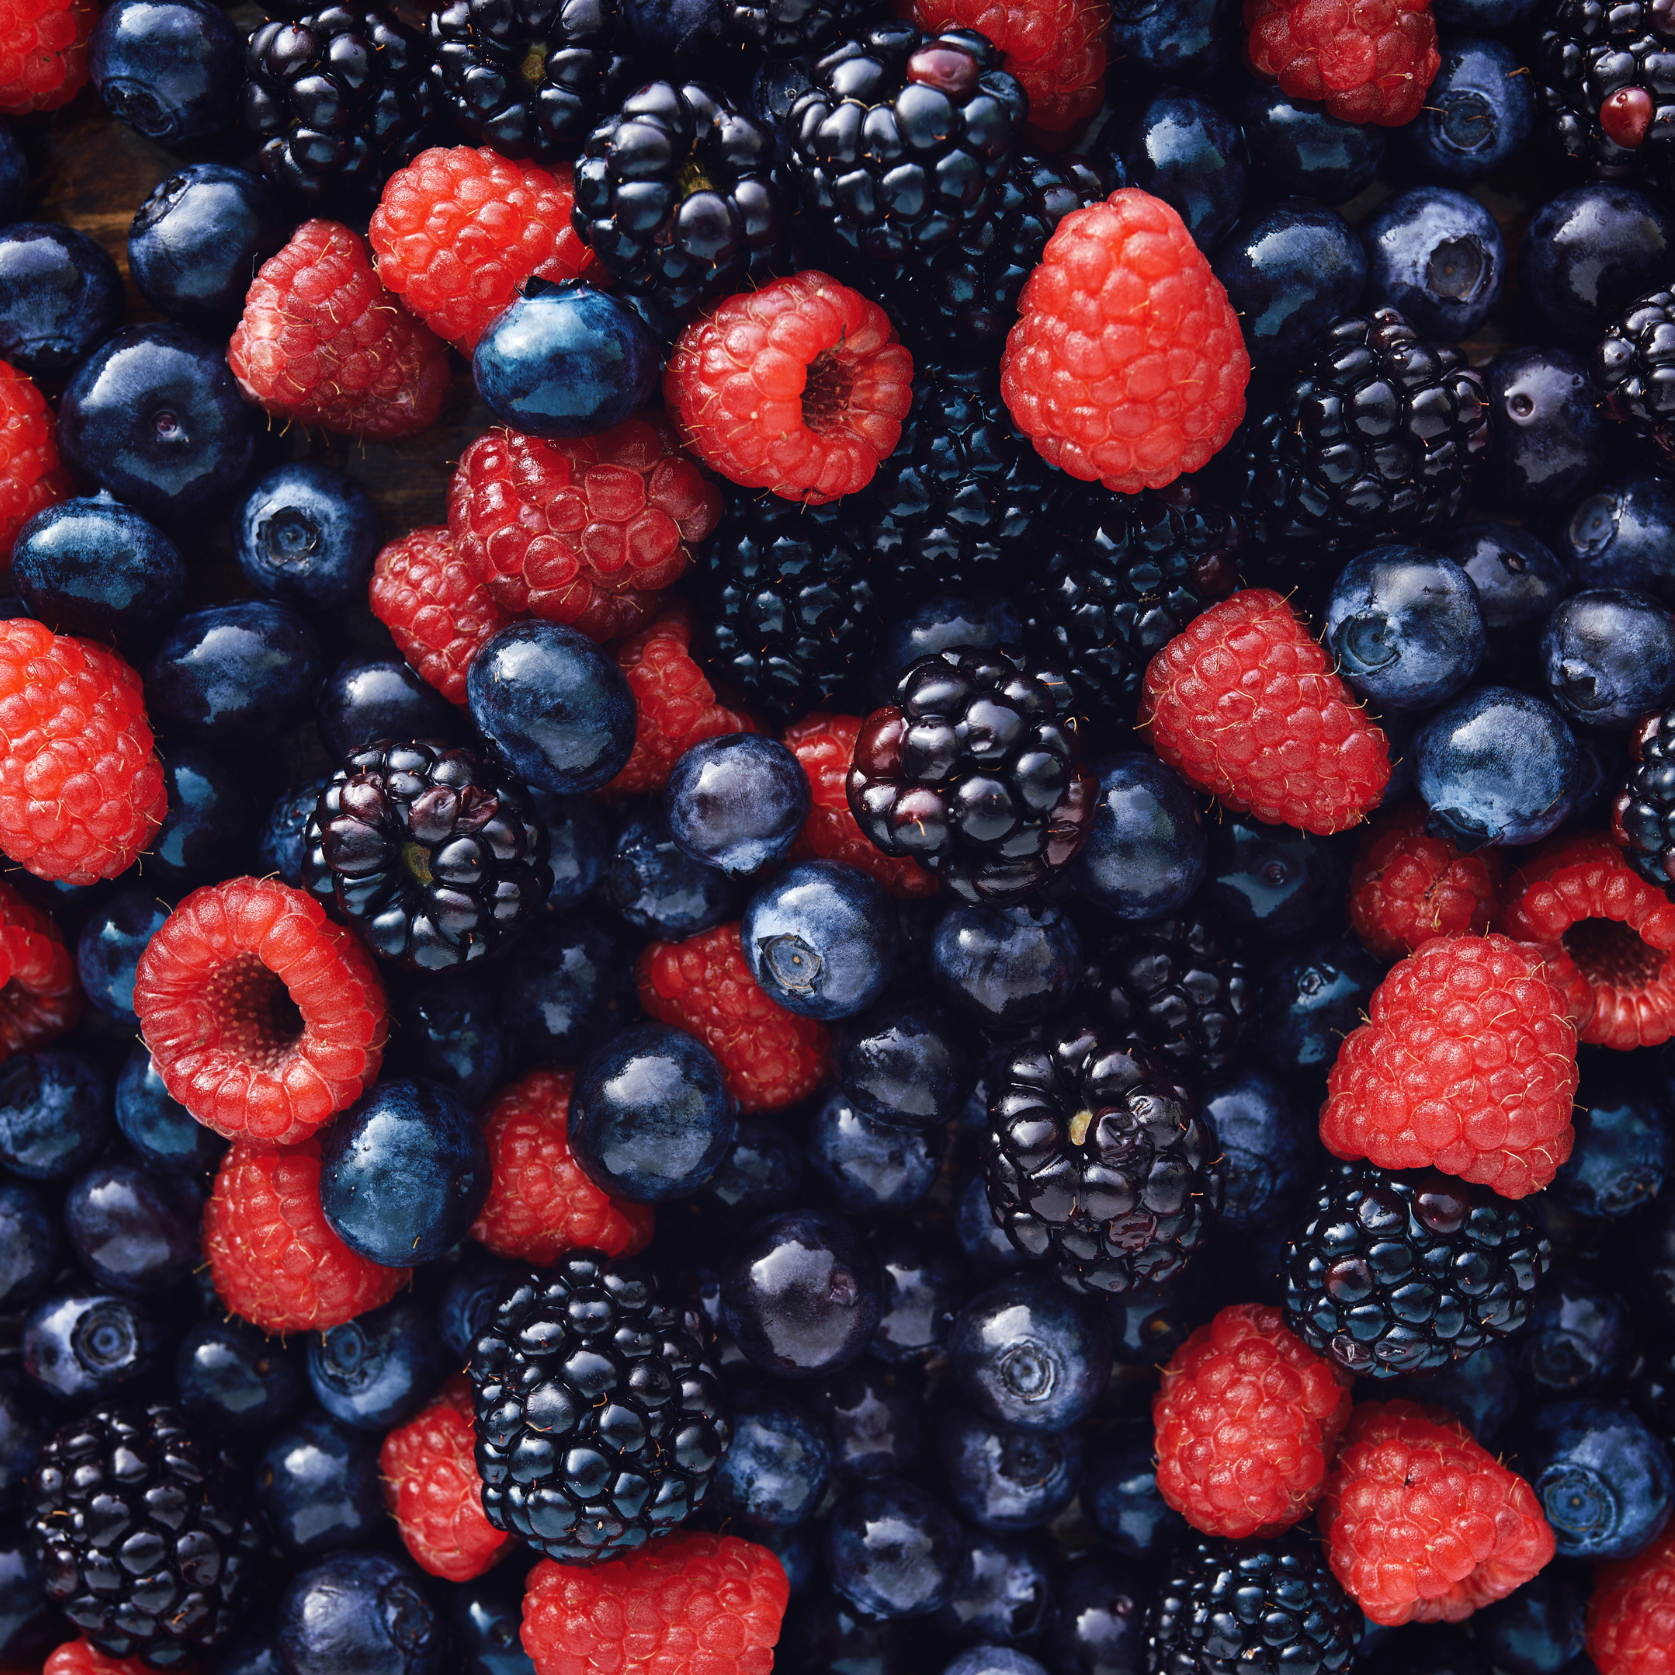 The image is shot from above and shows a mix of raspberries, blueberries, and blackberries.